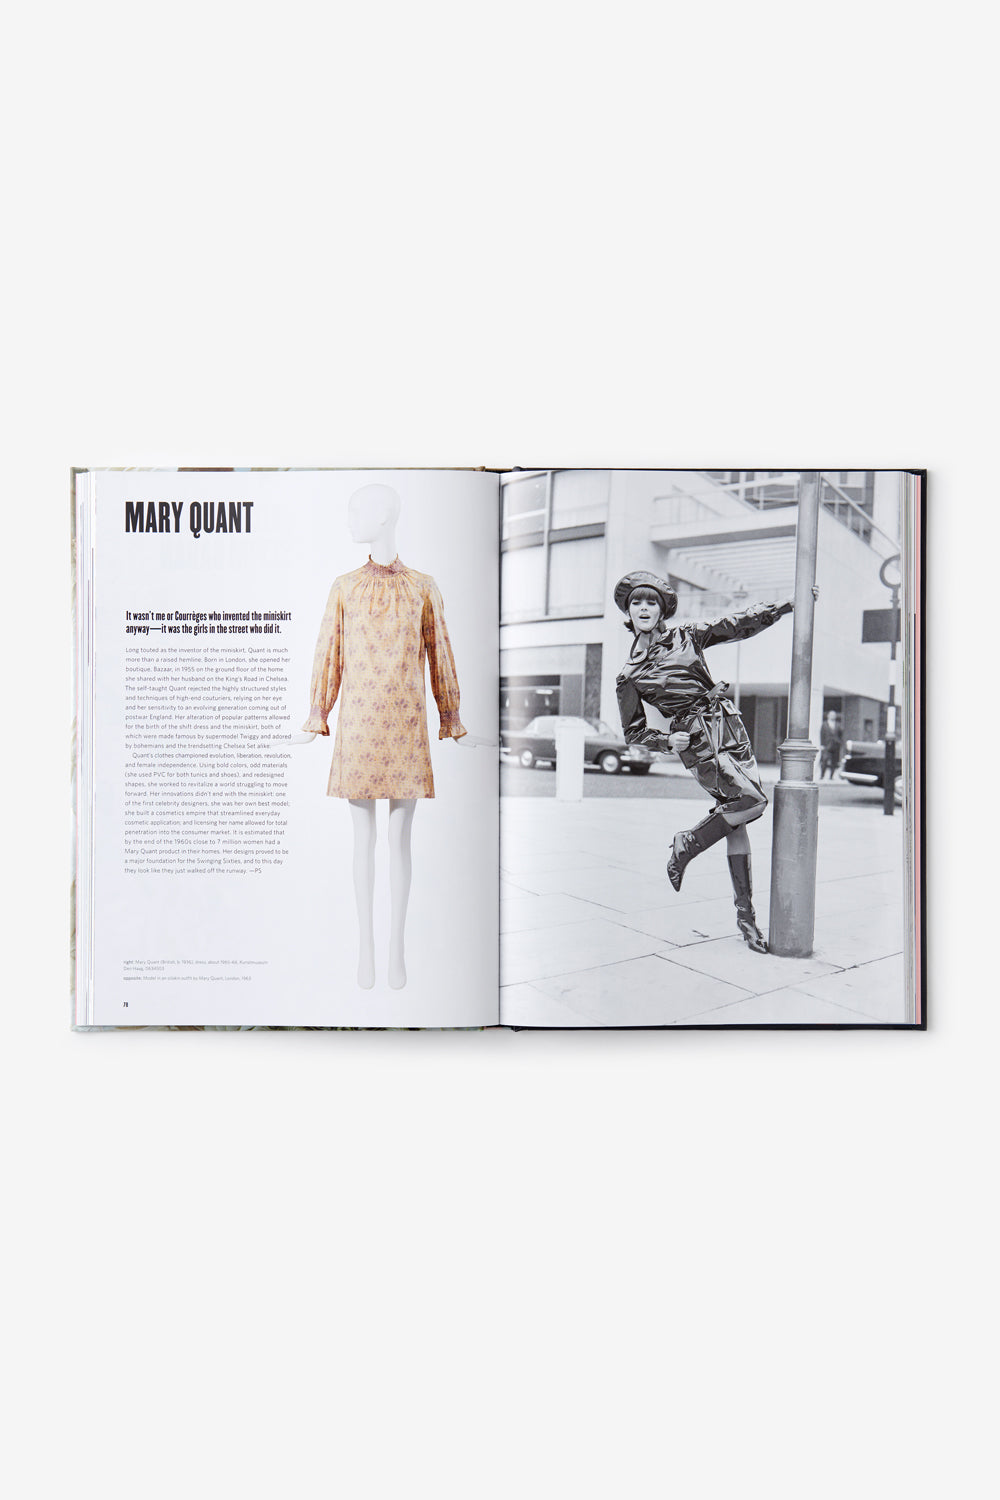 The Women Who Revolutionized Fashion featuring Mary Quant.